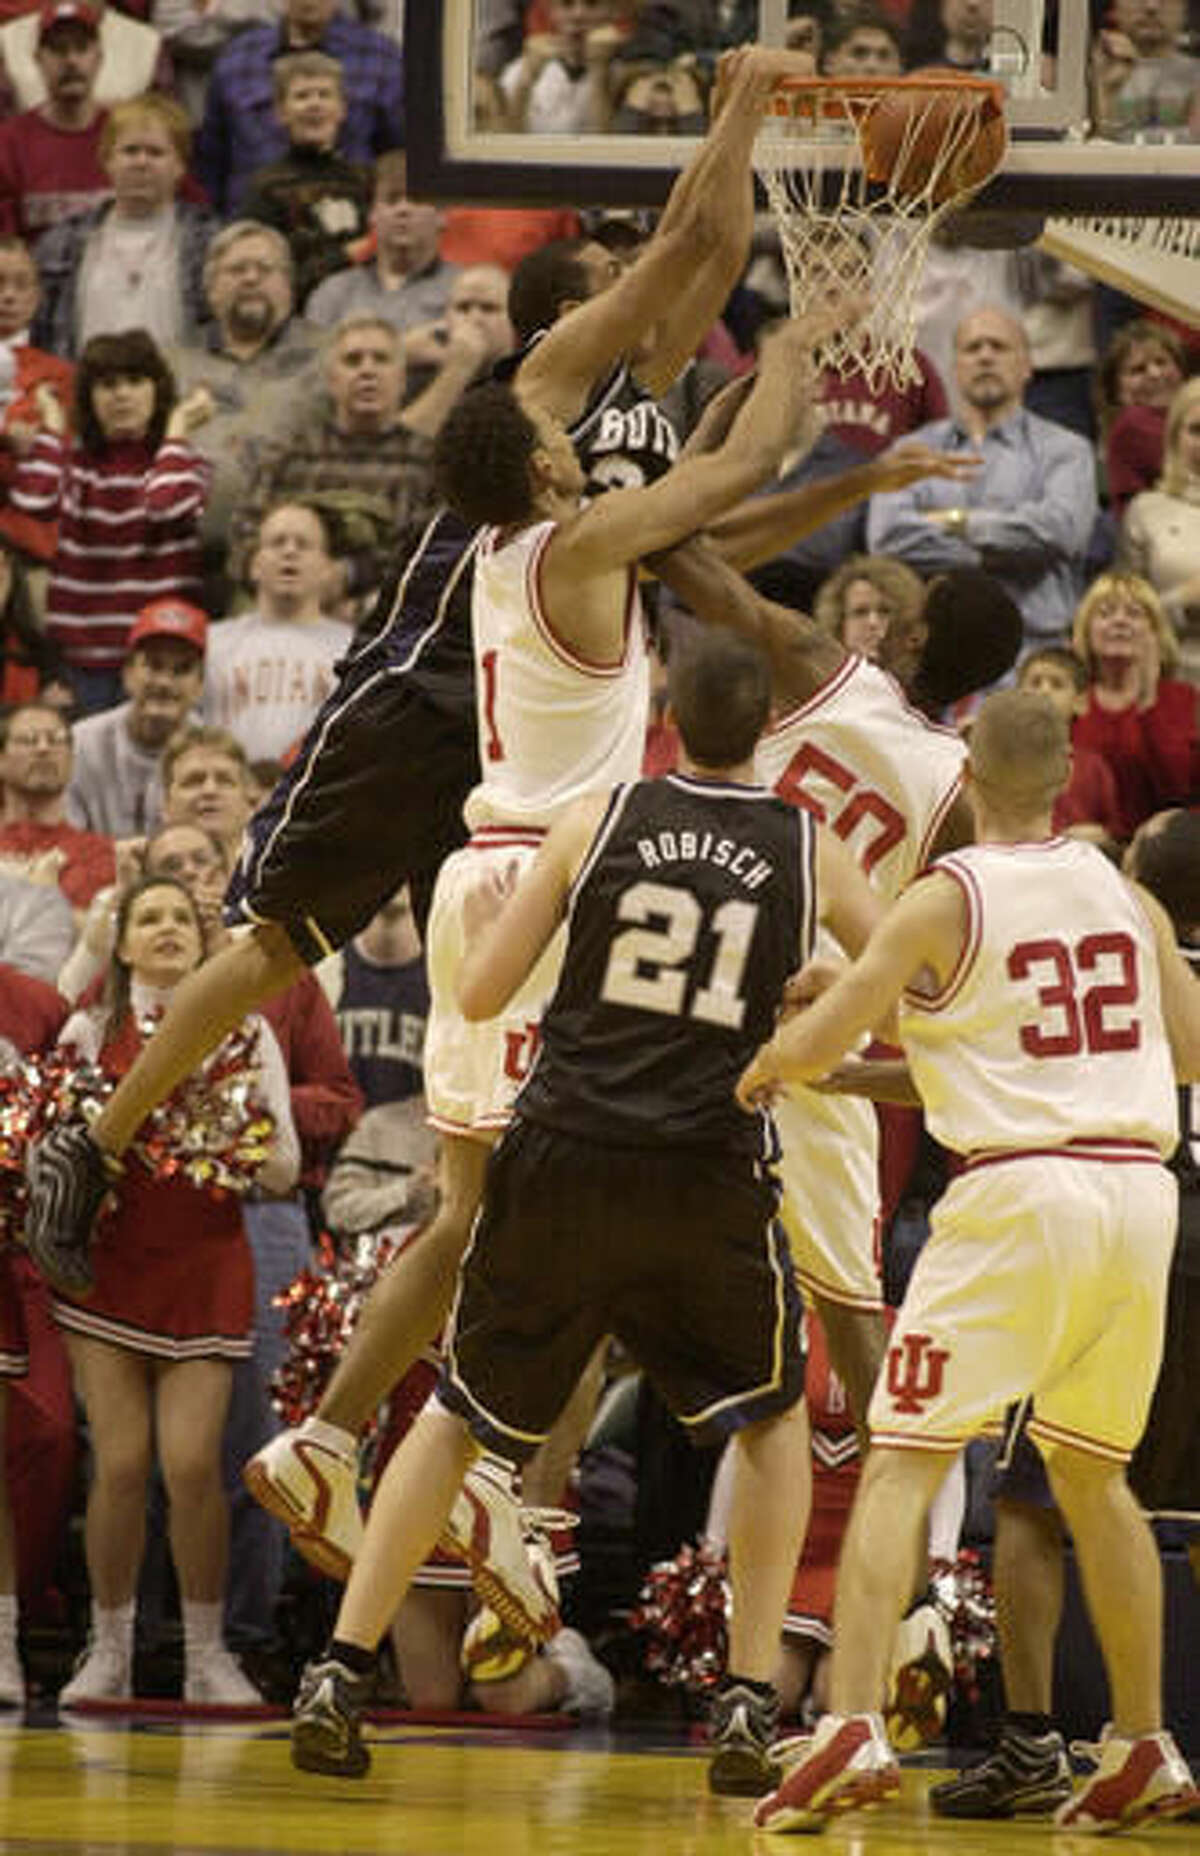 FILE - In this Dec. 29, 2001, file photo, Butler forward Joel Cornette (33) leaps over a crowded middle and slams home the game-winner off a rebound to give the 23rd-ranked Bulldogs a 66-64 victory over Indiana in the Hoosier Classic championship game in Indianapolis. Cornette, who helped Butler make the transition from a traditional mid-major program into a surprising power in college basketball, died Tuesday, Aug. 16, 2016, in a Chicago apartment. He was 35. (AP Photo/Darron Cummings, FIle)